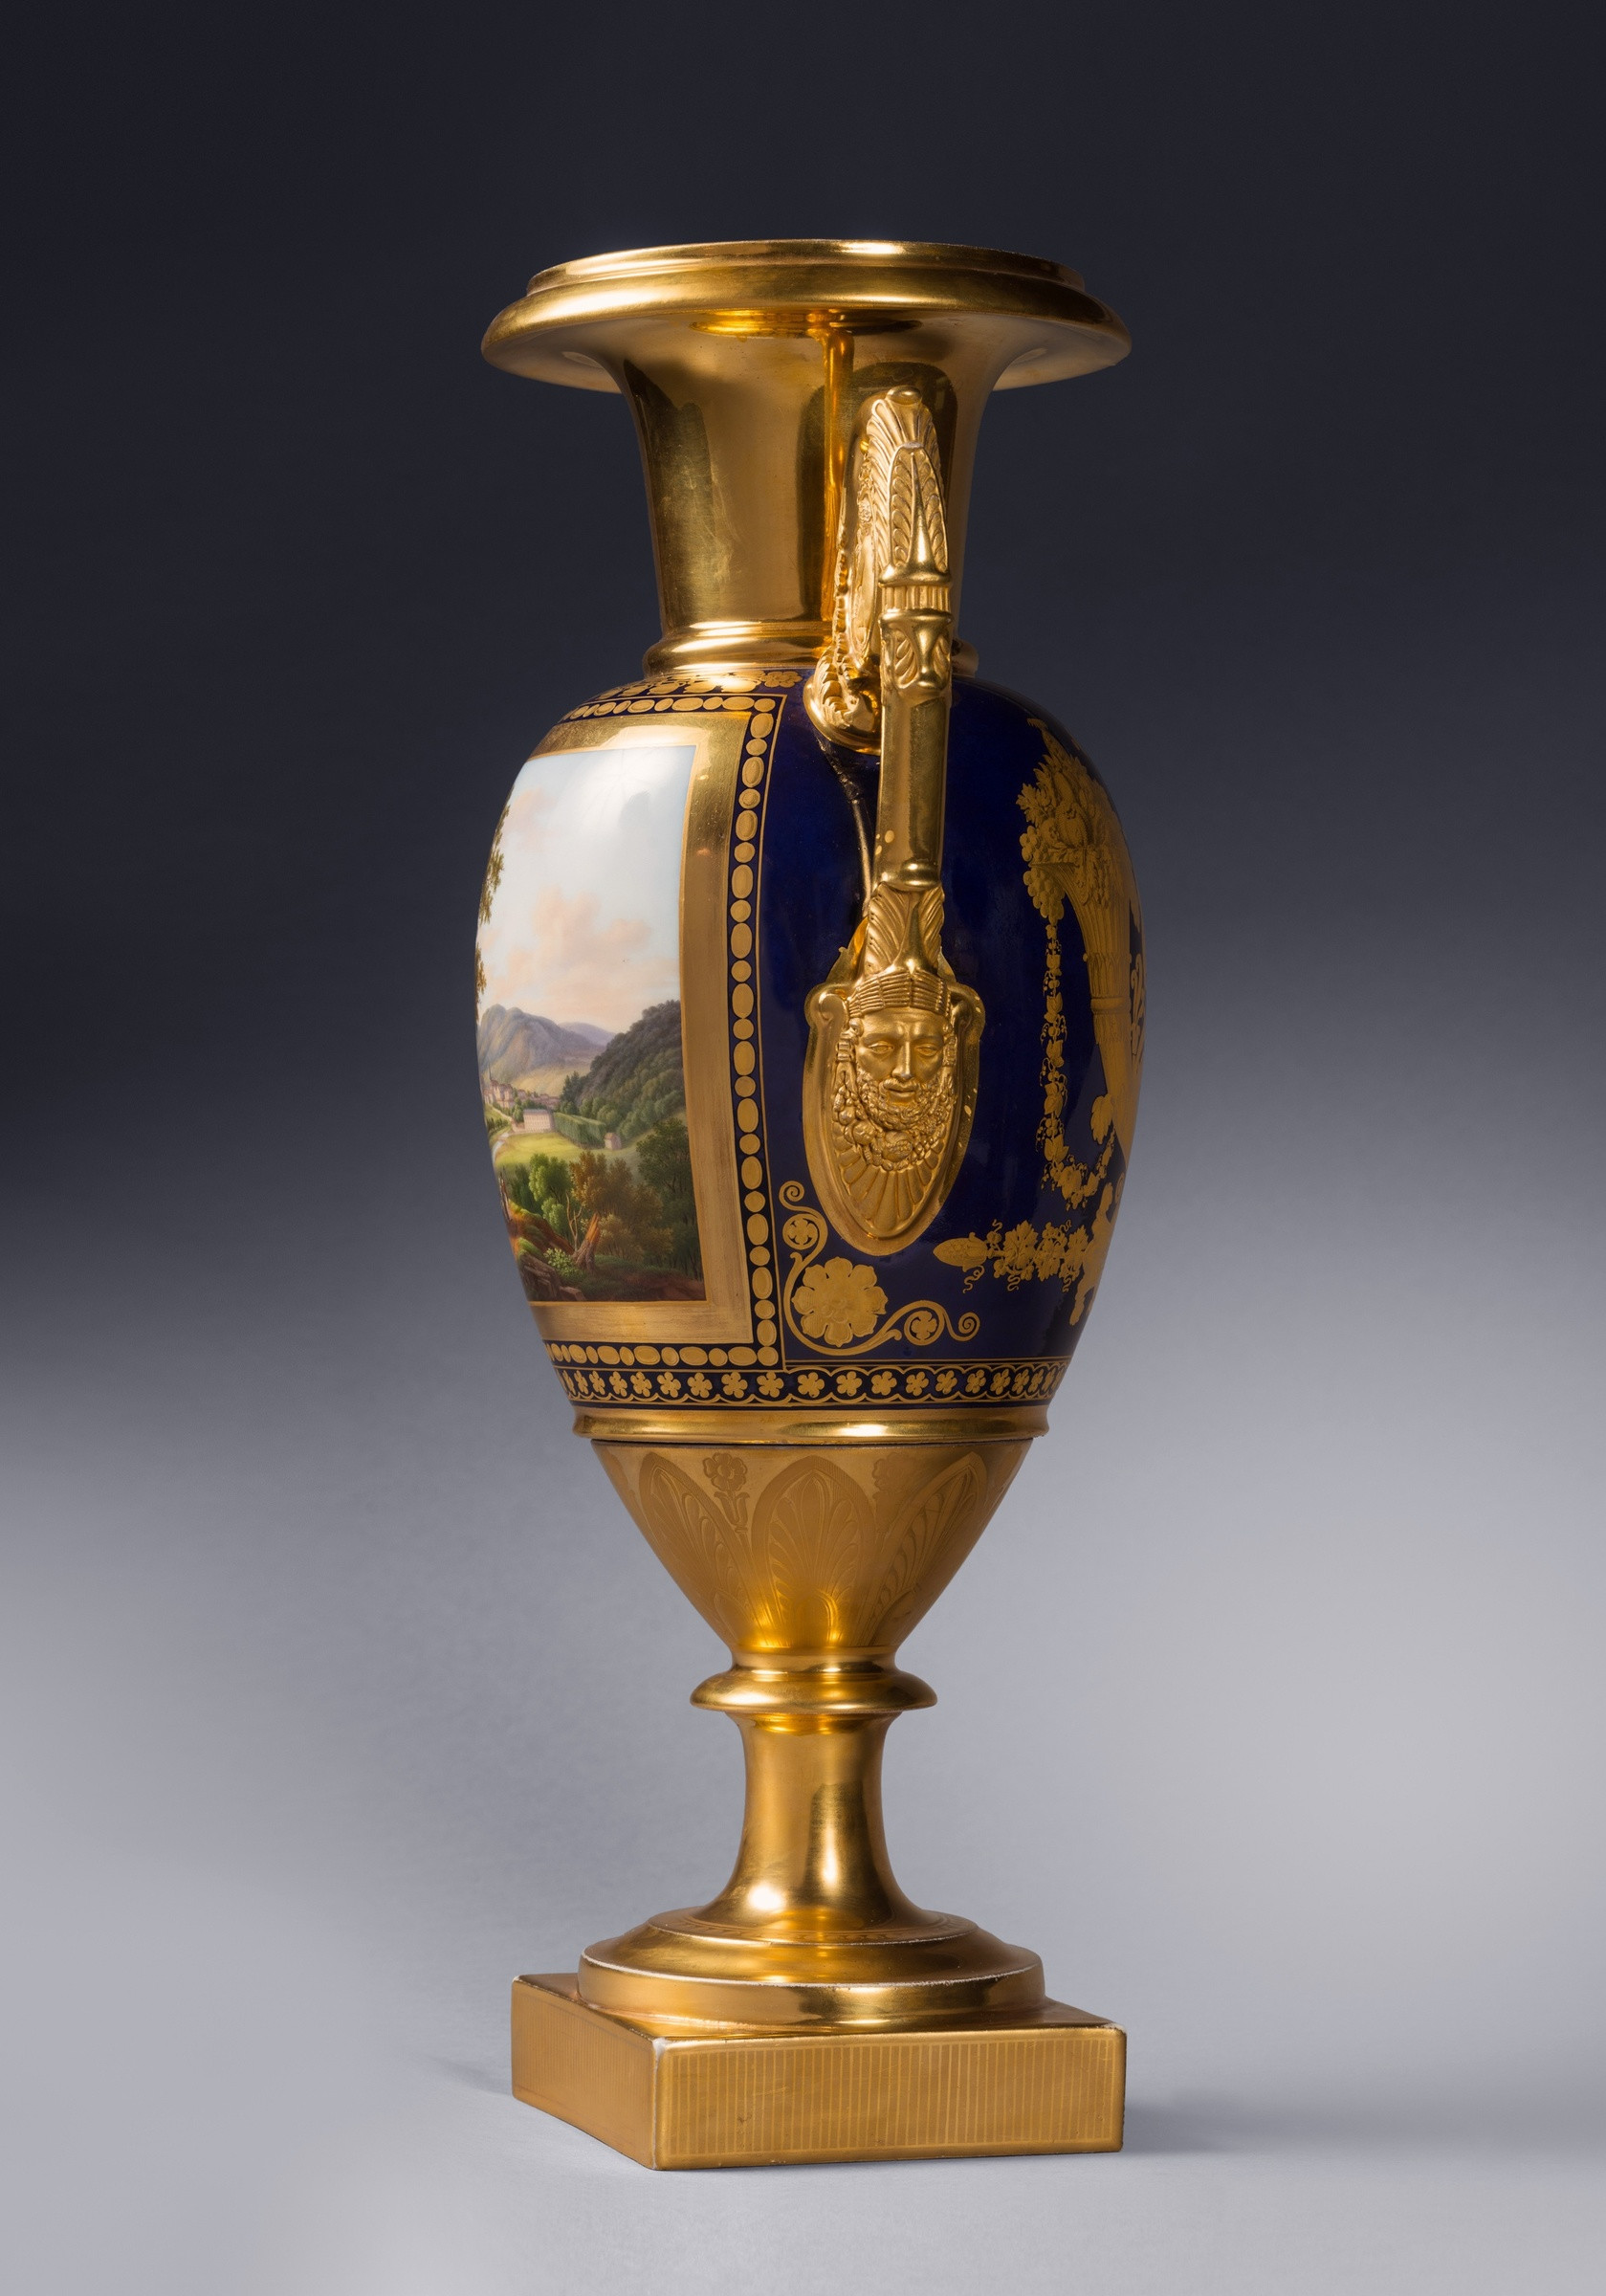 Head Vases for Sale Of Nast Fra¨res Manufactory attributed to A Pair Of Restauration Two Intended for A Pair Of Restauration Two Handled Vases Probably by Nast Fra¨res Manufactory